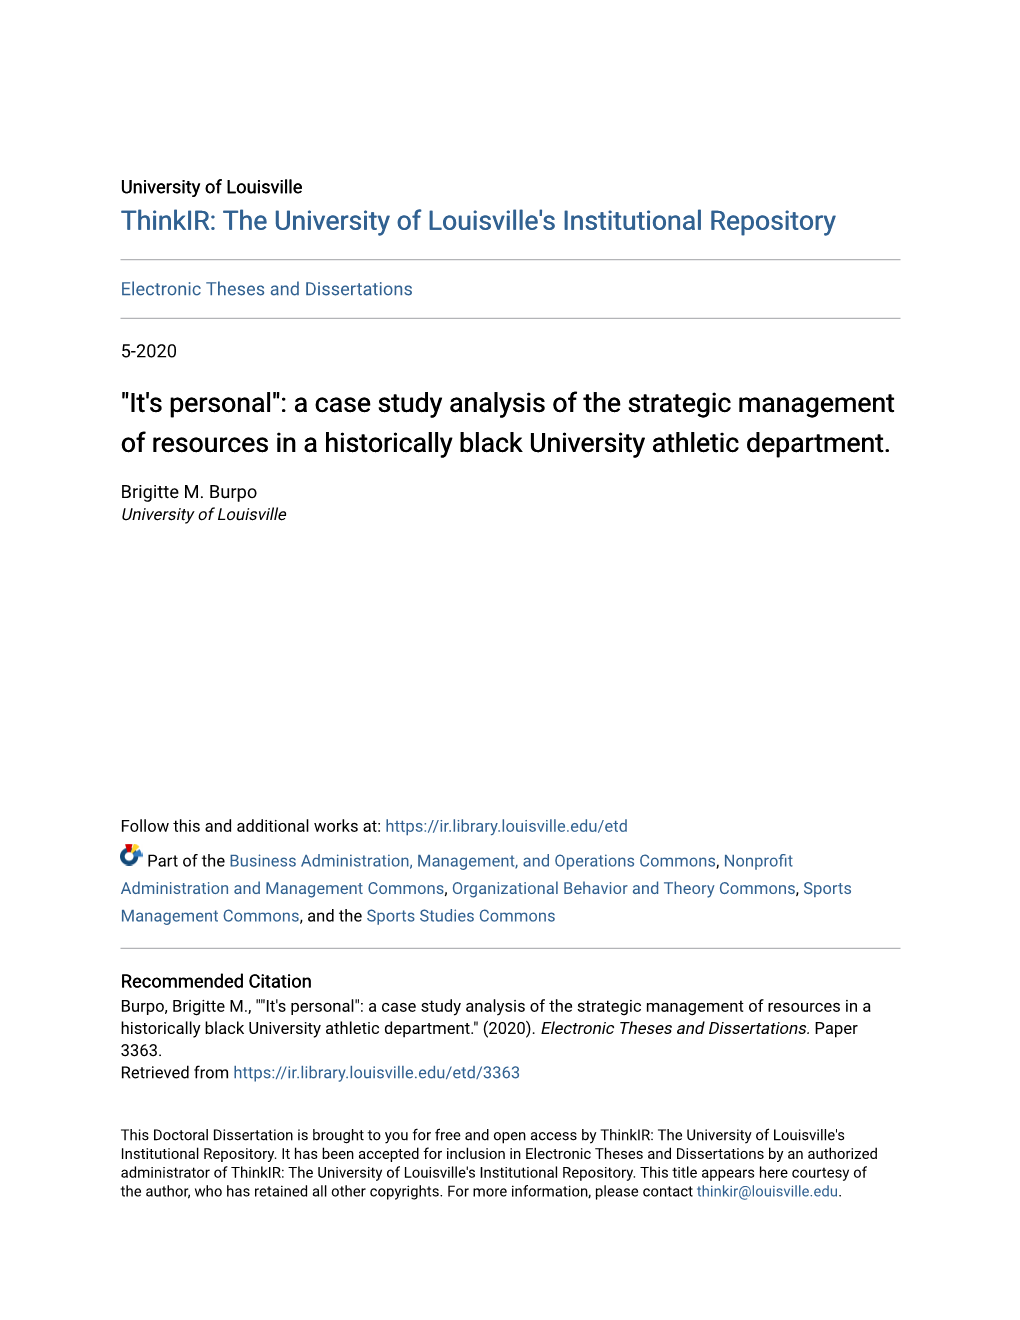 A Case Study Analysis of the Strategic Management of Resources in a Historically Black University Athletic Department